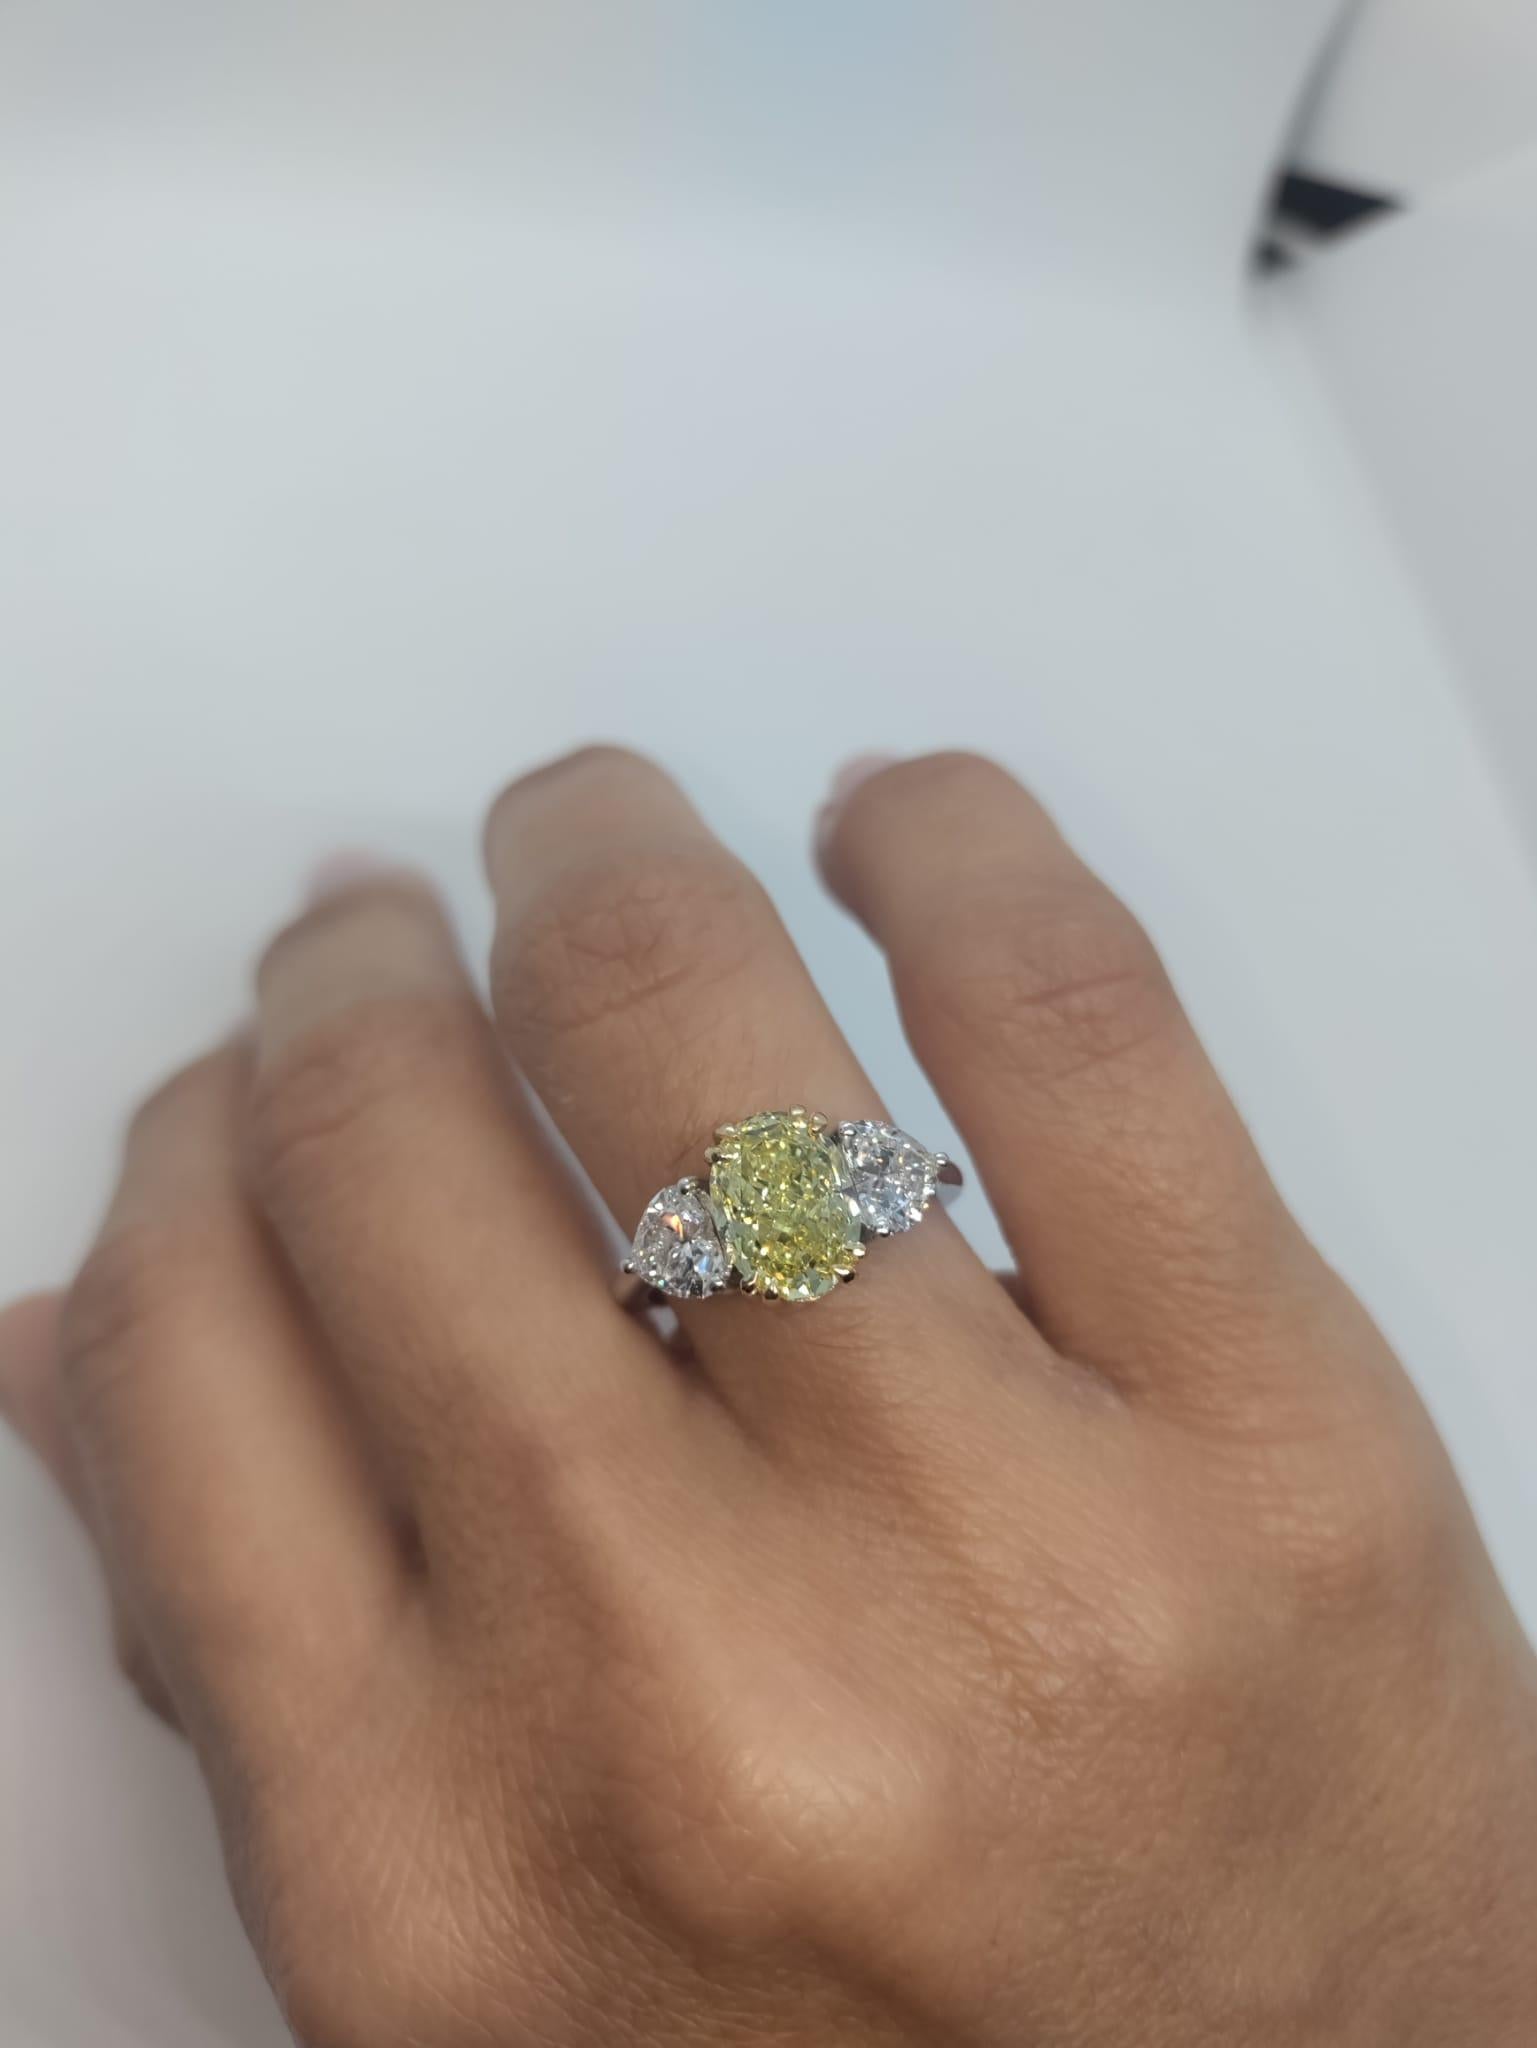 Enhance your elegance with this extraordinary ring, an Italian masterpiece that embodies sophistication and timeless beauty. At the heart of this jewel is a 2.5-carat oval Fancy Yellow diamond, GIA certified, chosen for its brilliance and unique